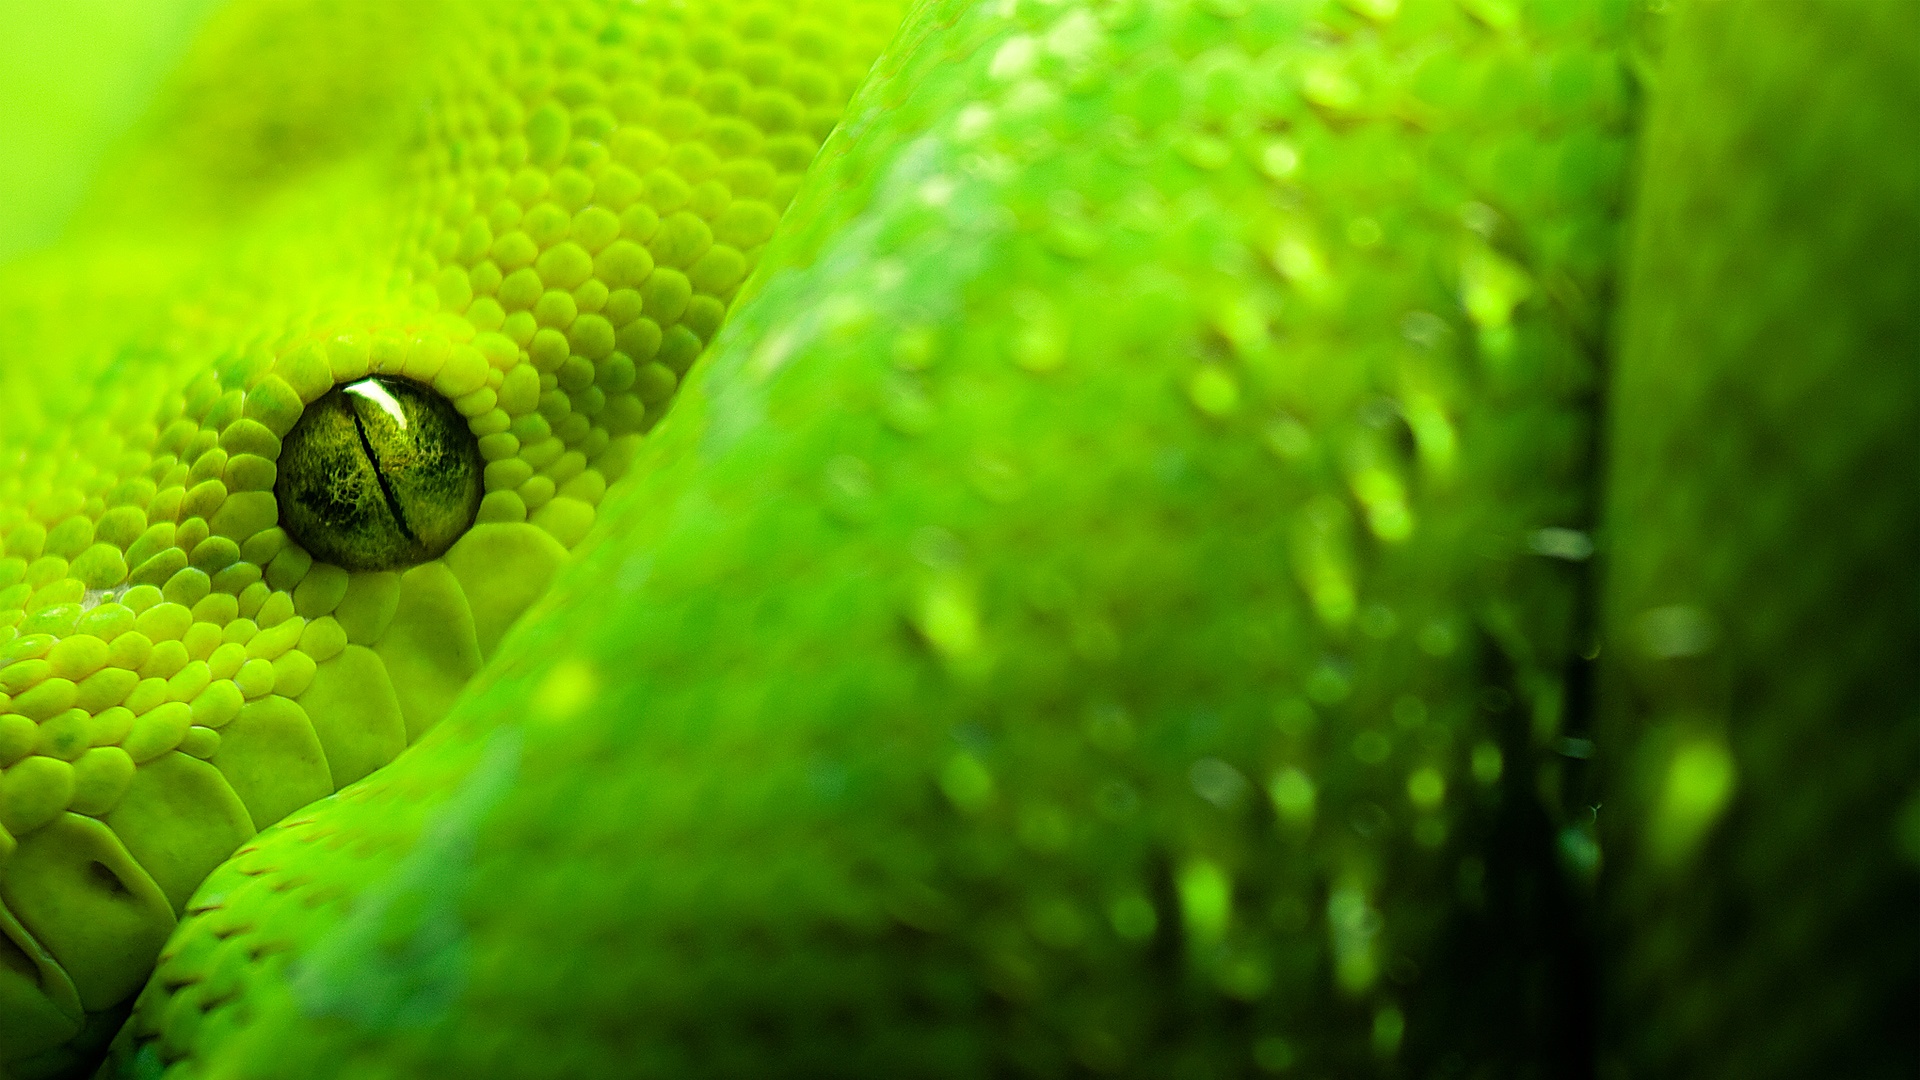 Green Viper Snake Wallpaper Image Amp Pictures Becuo